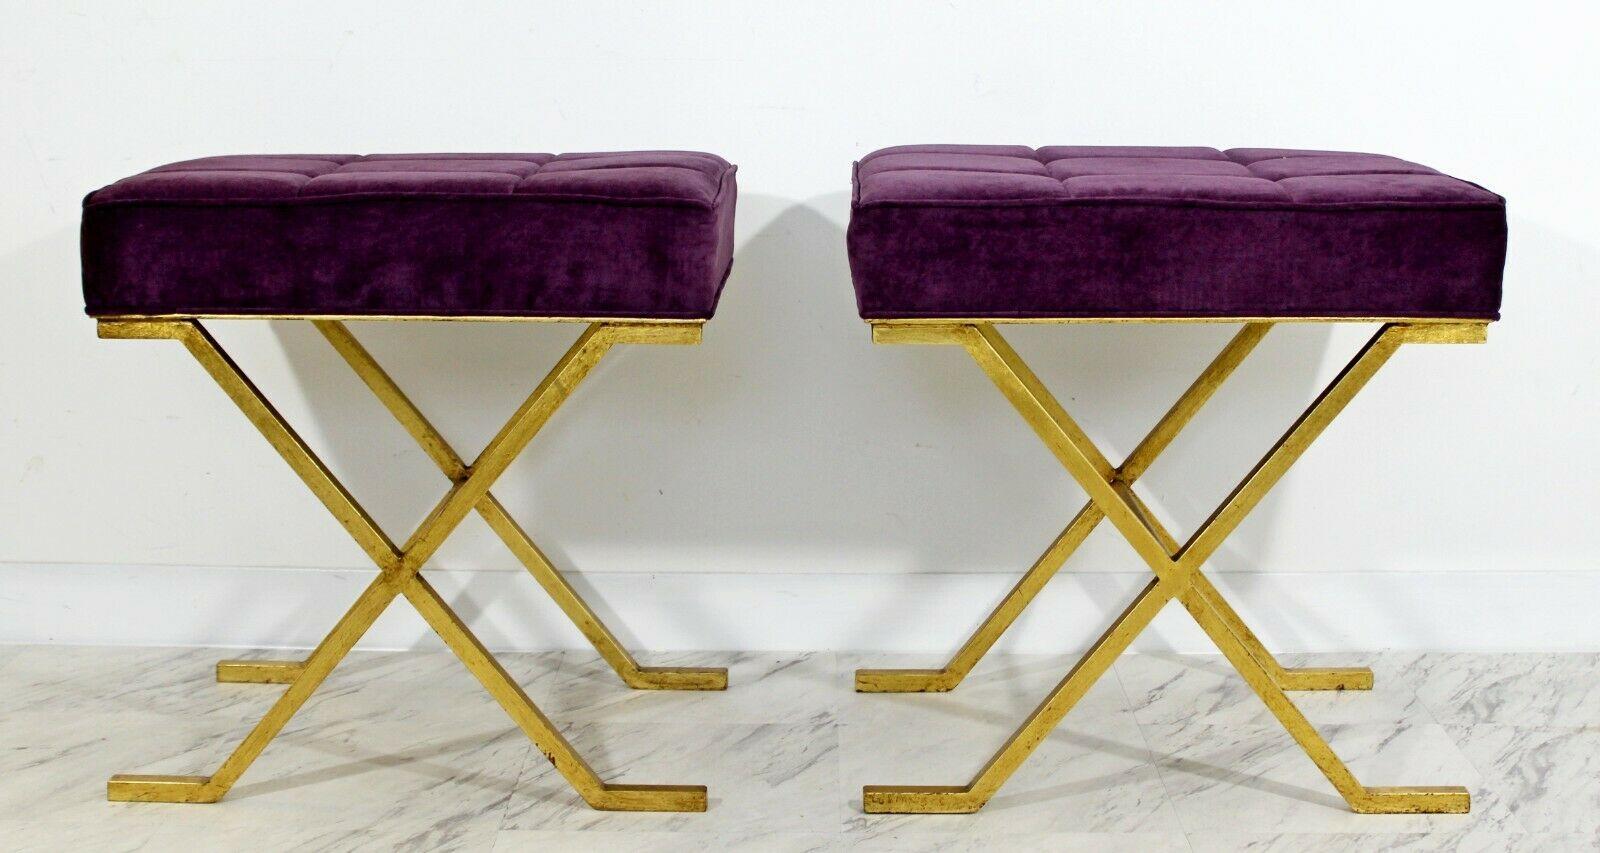 For your consideration is a wonderfully vintage, solid brass, pair of Hollywood Regency stools, with purple velvet seats. In excellent condition. The dimensions are 22